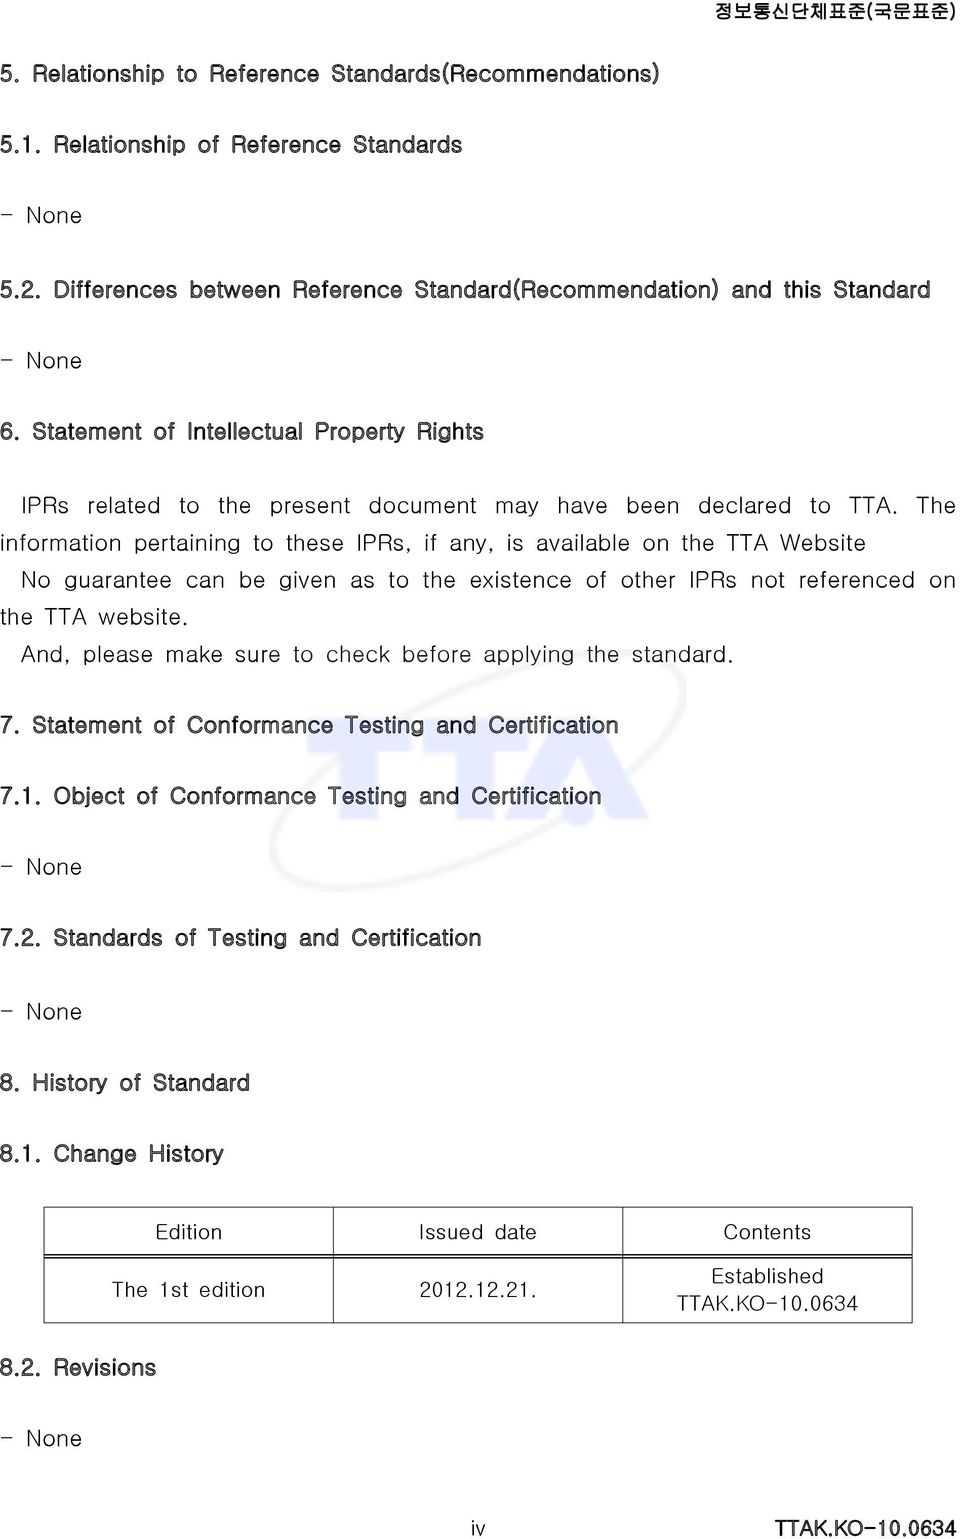 The information pertaining to these IPRs, if any, is available on the TTA Website No guarantee can be given as to the existence of other IPRs not referenced on the TTA website.